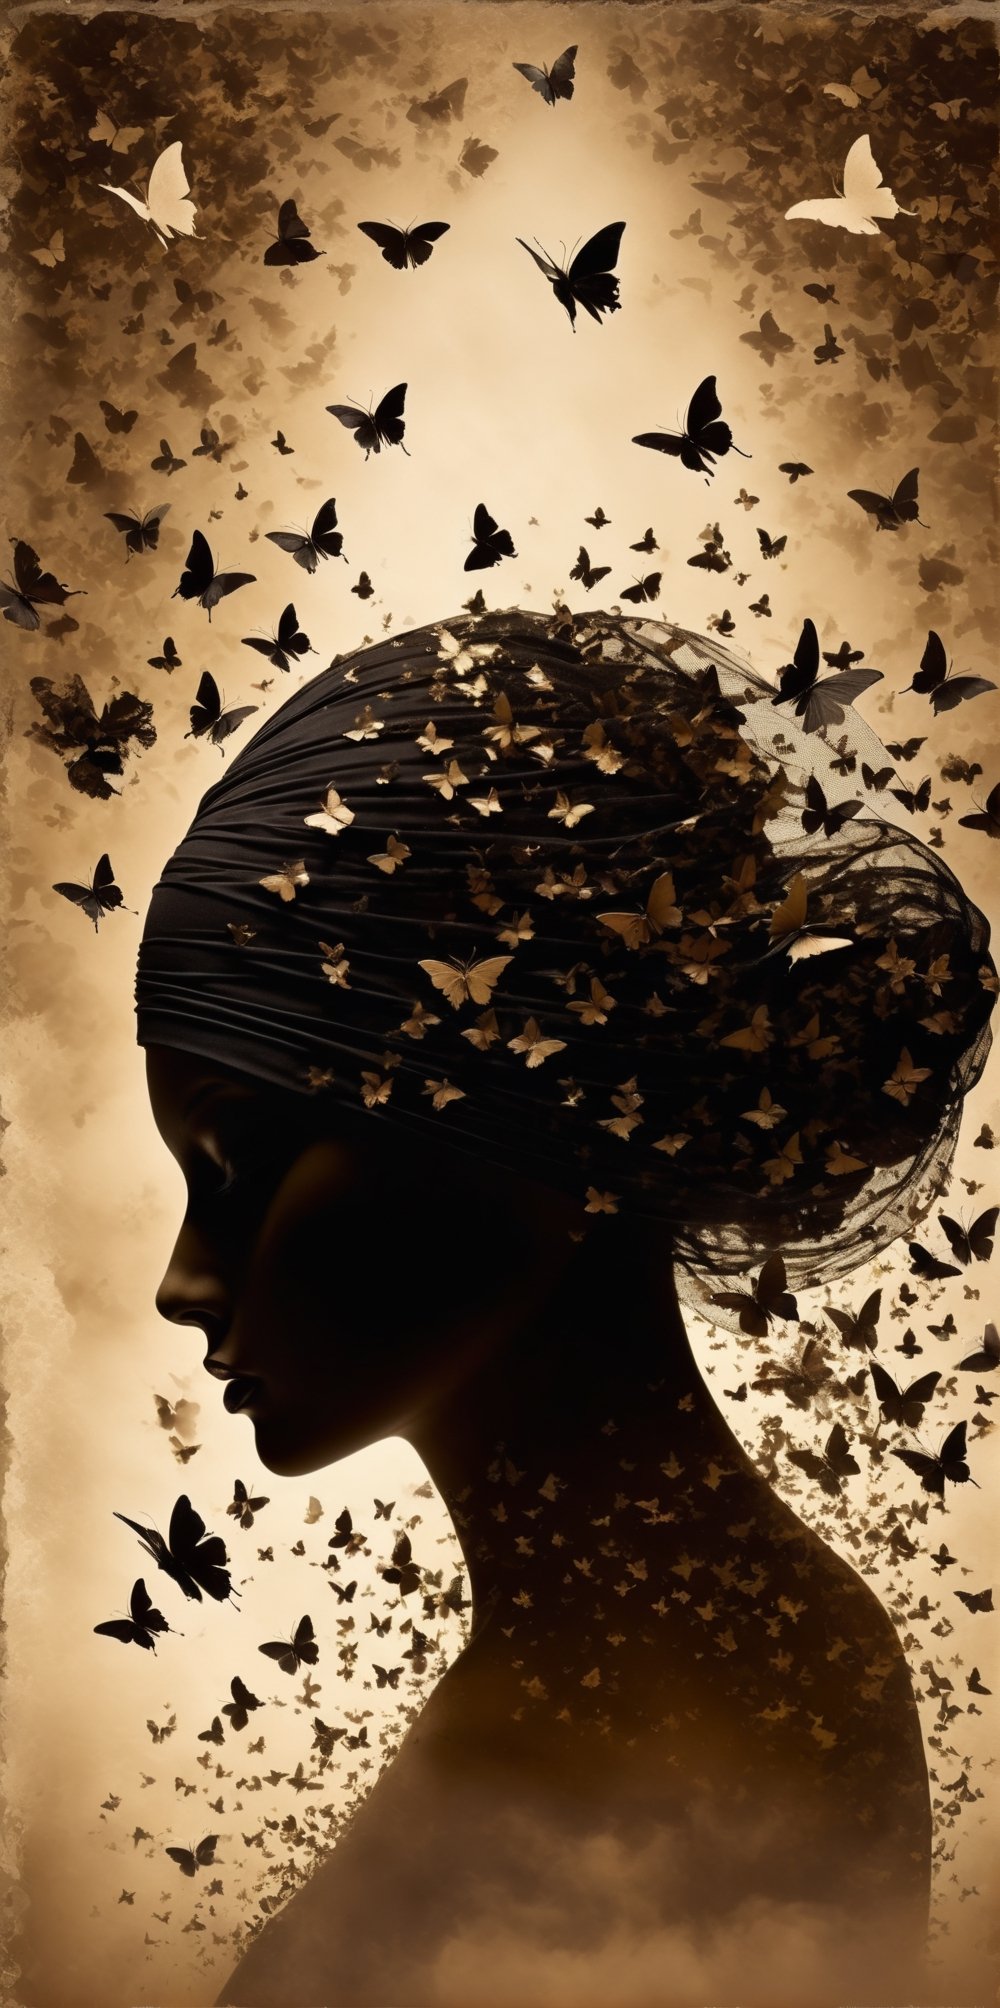 KILLING ARTIST, 3D HDMI quality 4D hiperrealistic, in blurring old fashioned sepia ((( very grated photo image))) black silhouette of a woman with a black veil in his head made of flying butterflies, dark fantasy, poster, typography, cinematic, photo